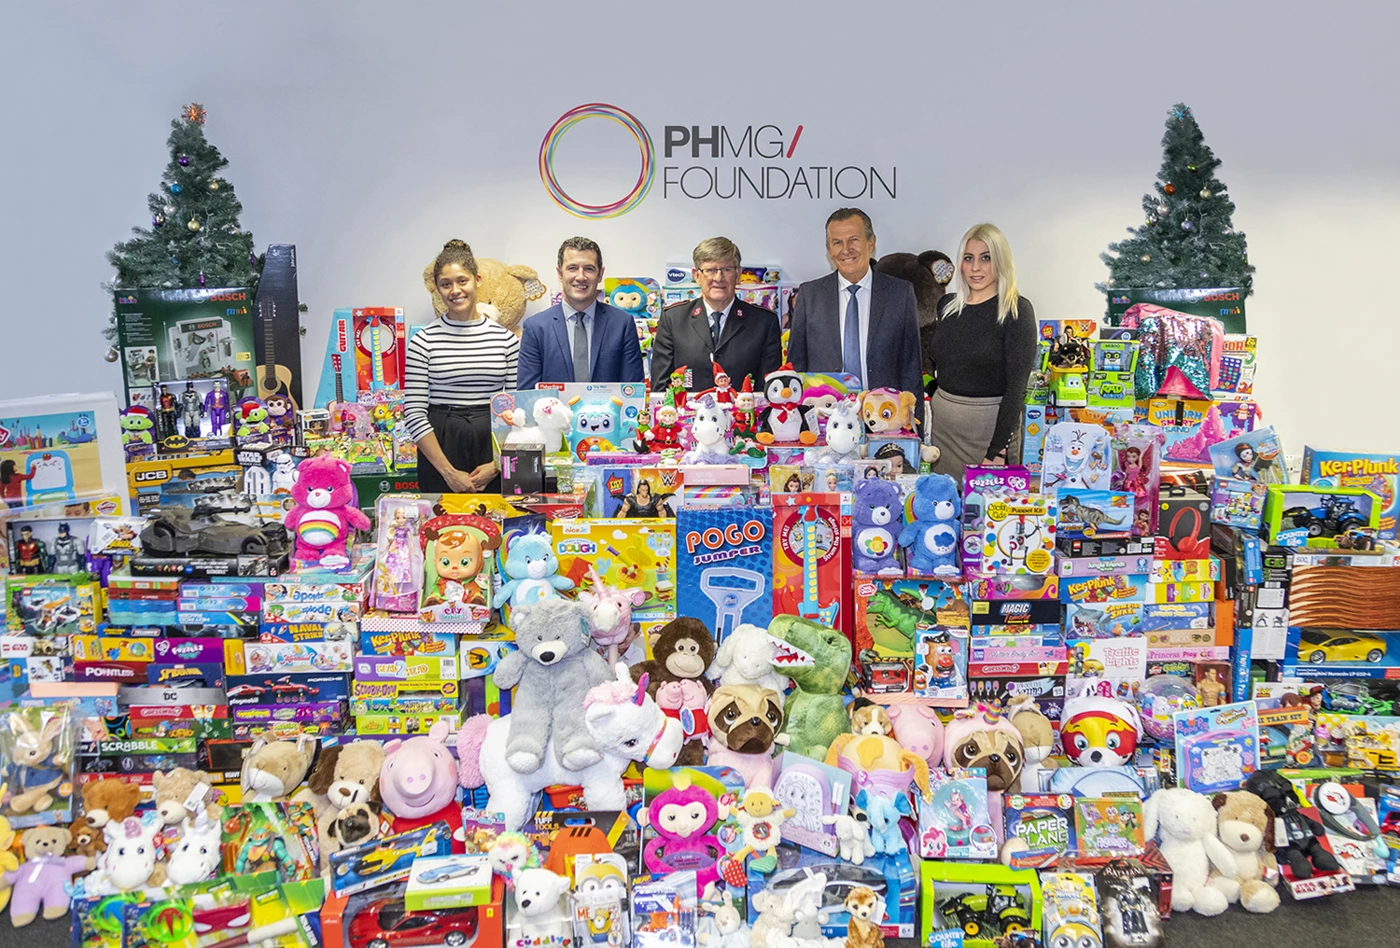 PHMG team presents Salvation Army with toys from Global Toy Drive